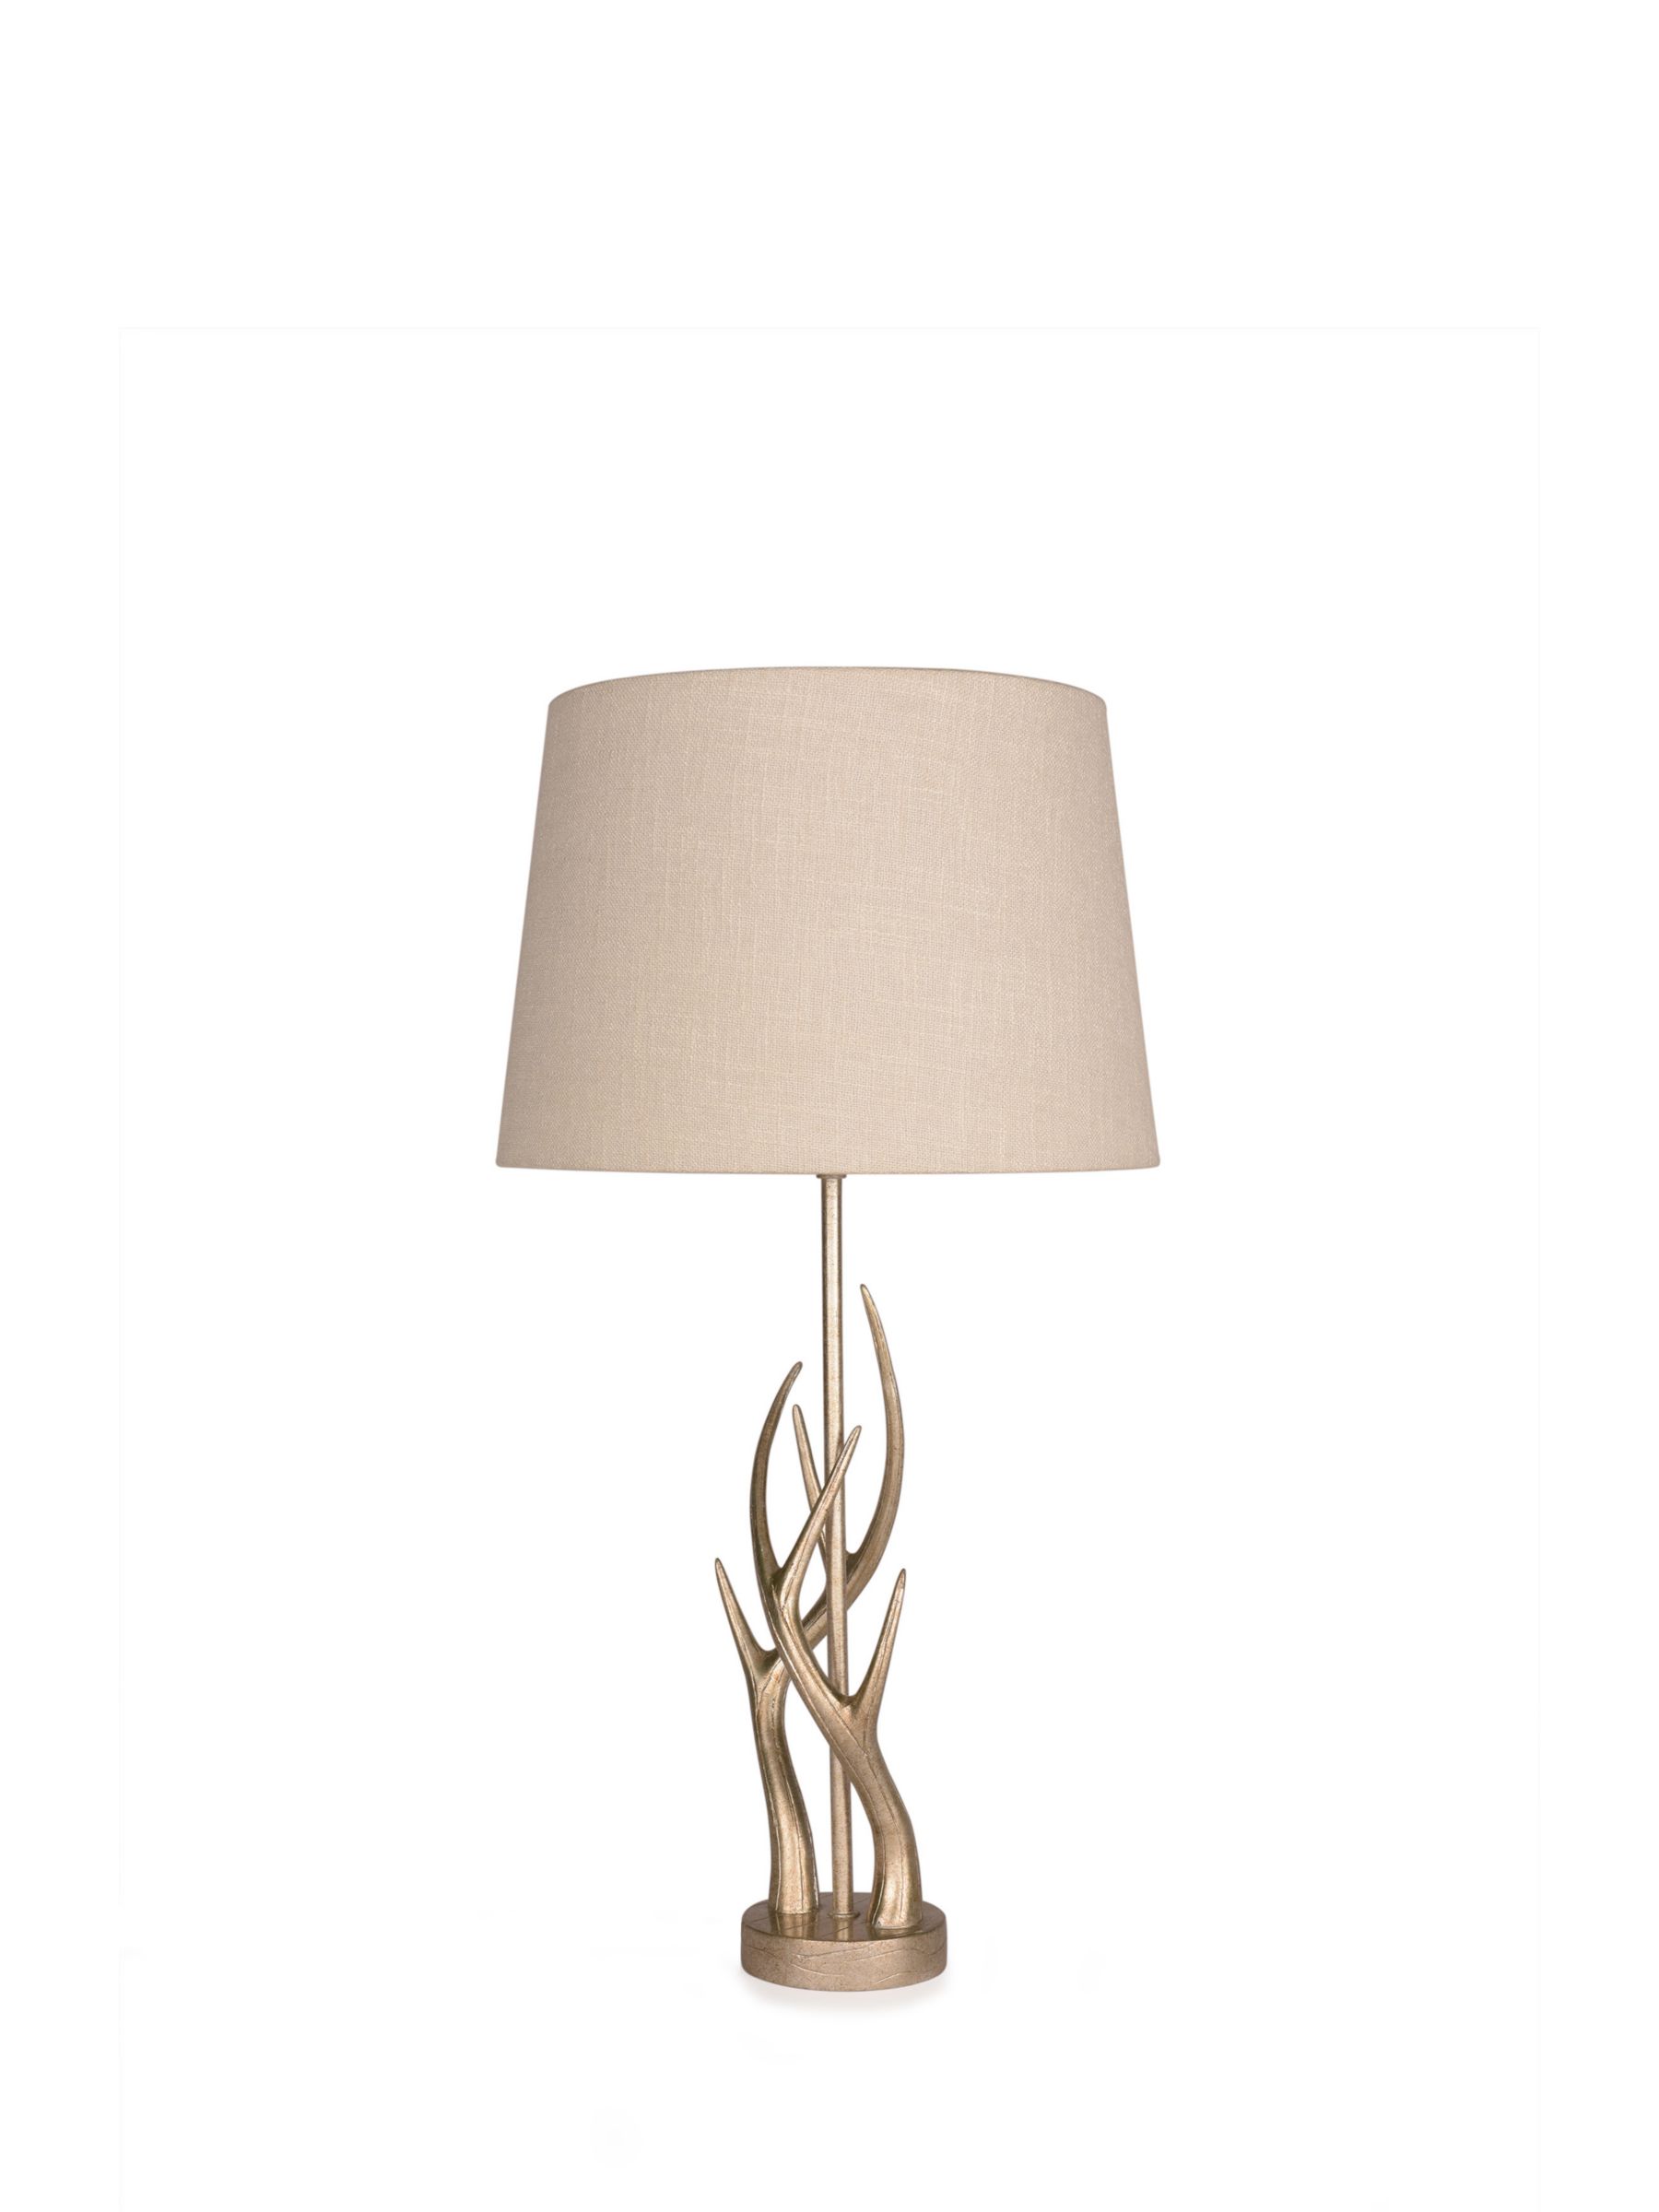 Photo of Laura ashley mulroy antler table lamp champagne